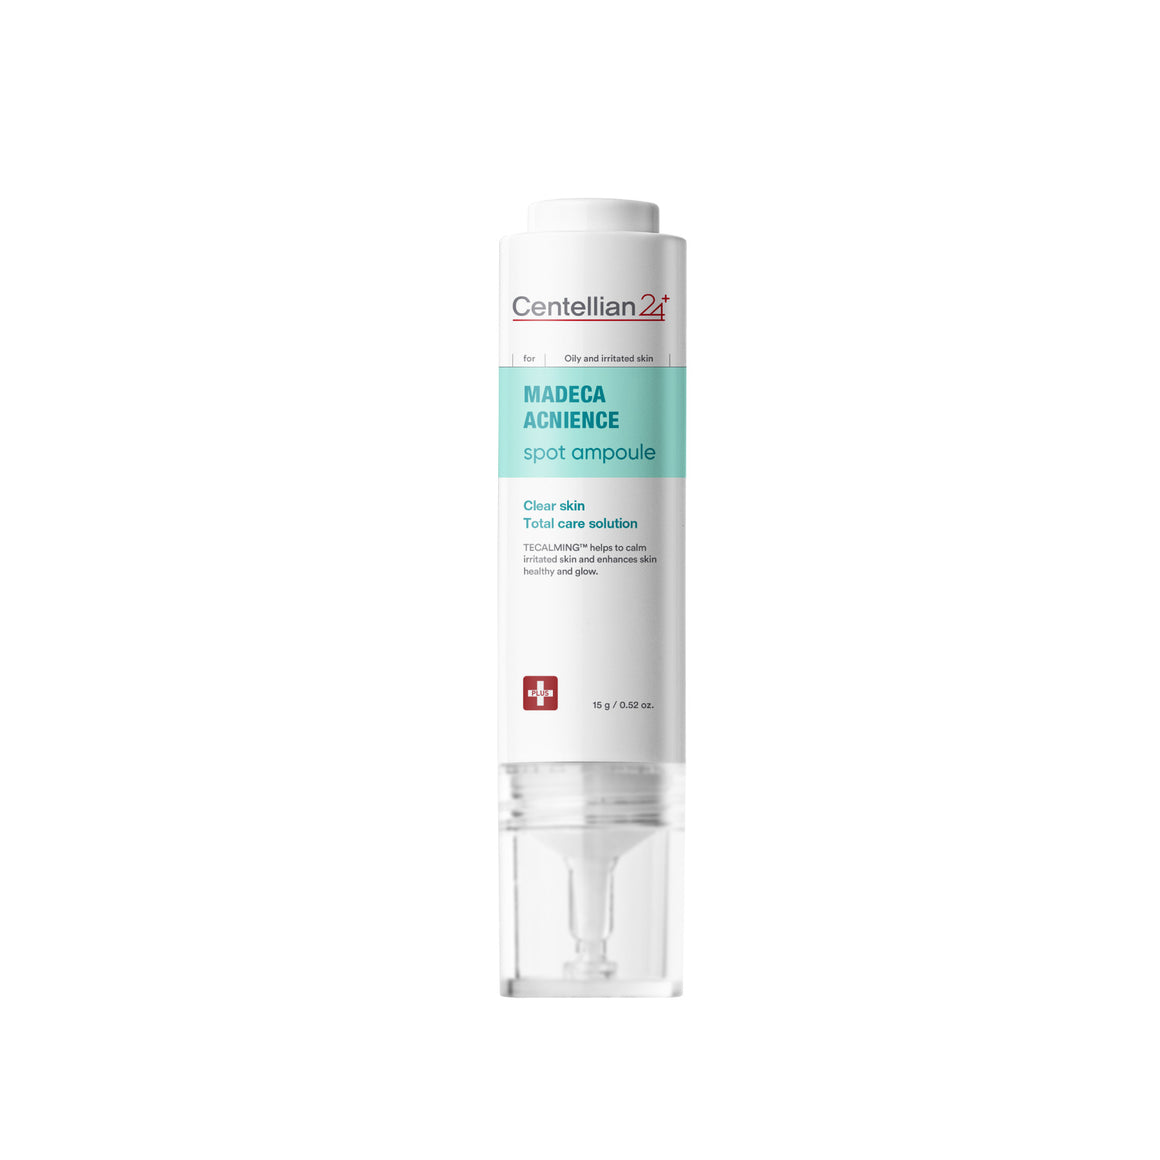 CENTELLIAN24 Madeca Acnience Spot Ampoule